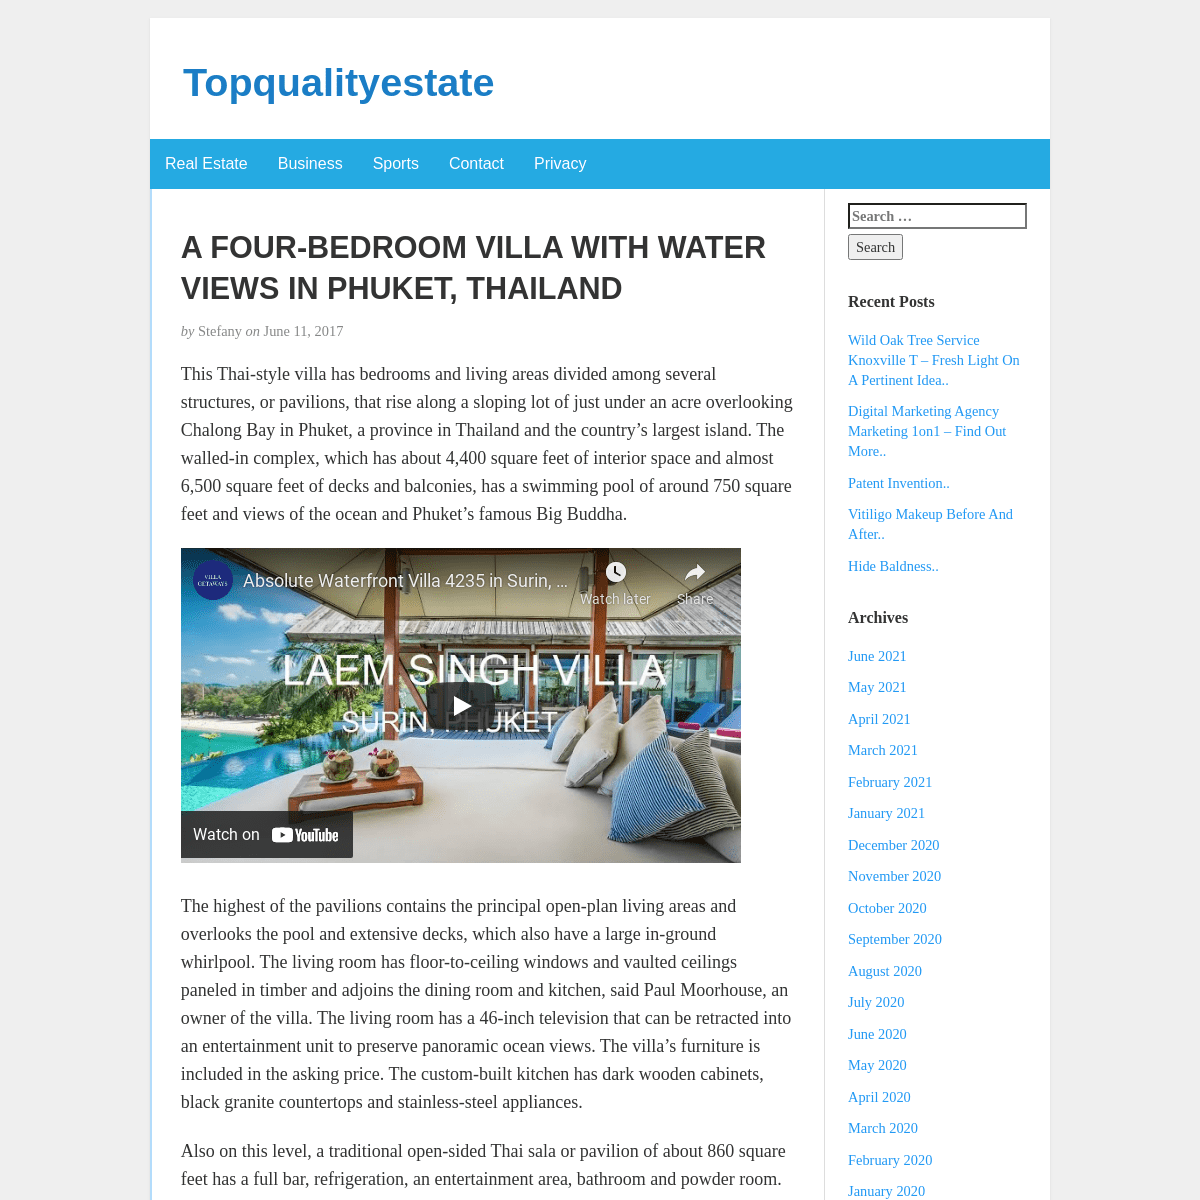 A complete backup of https://topqualityestate.com